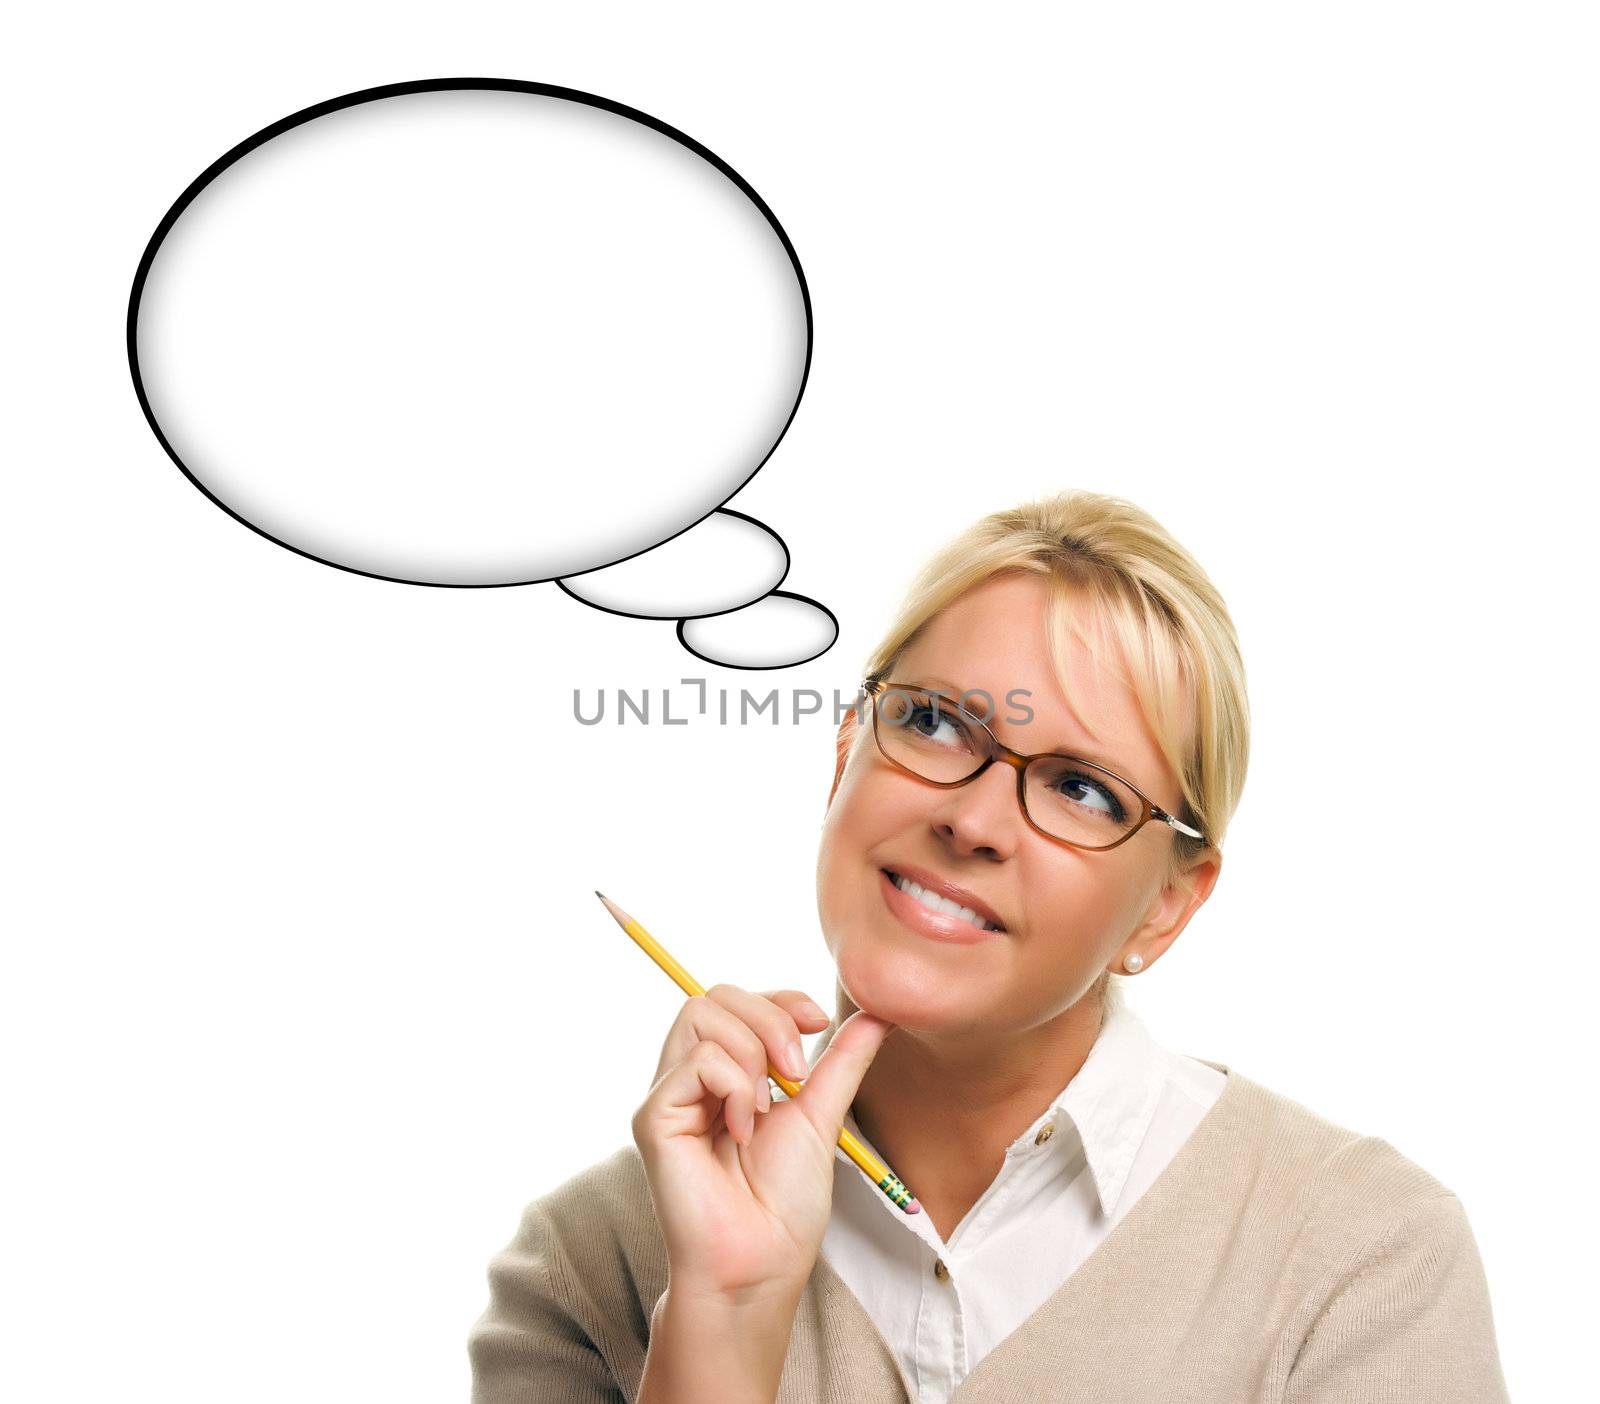 Beautiful Woman and Blank Thought Bubbles with Clipping Path by Feverpitched